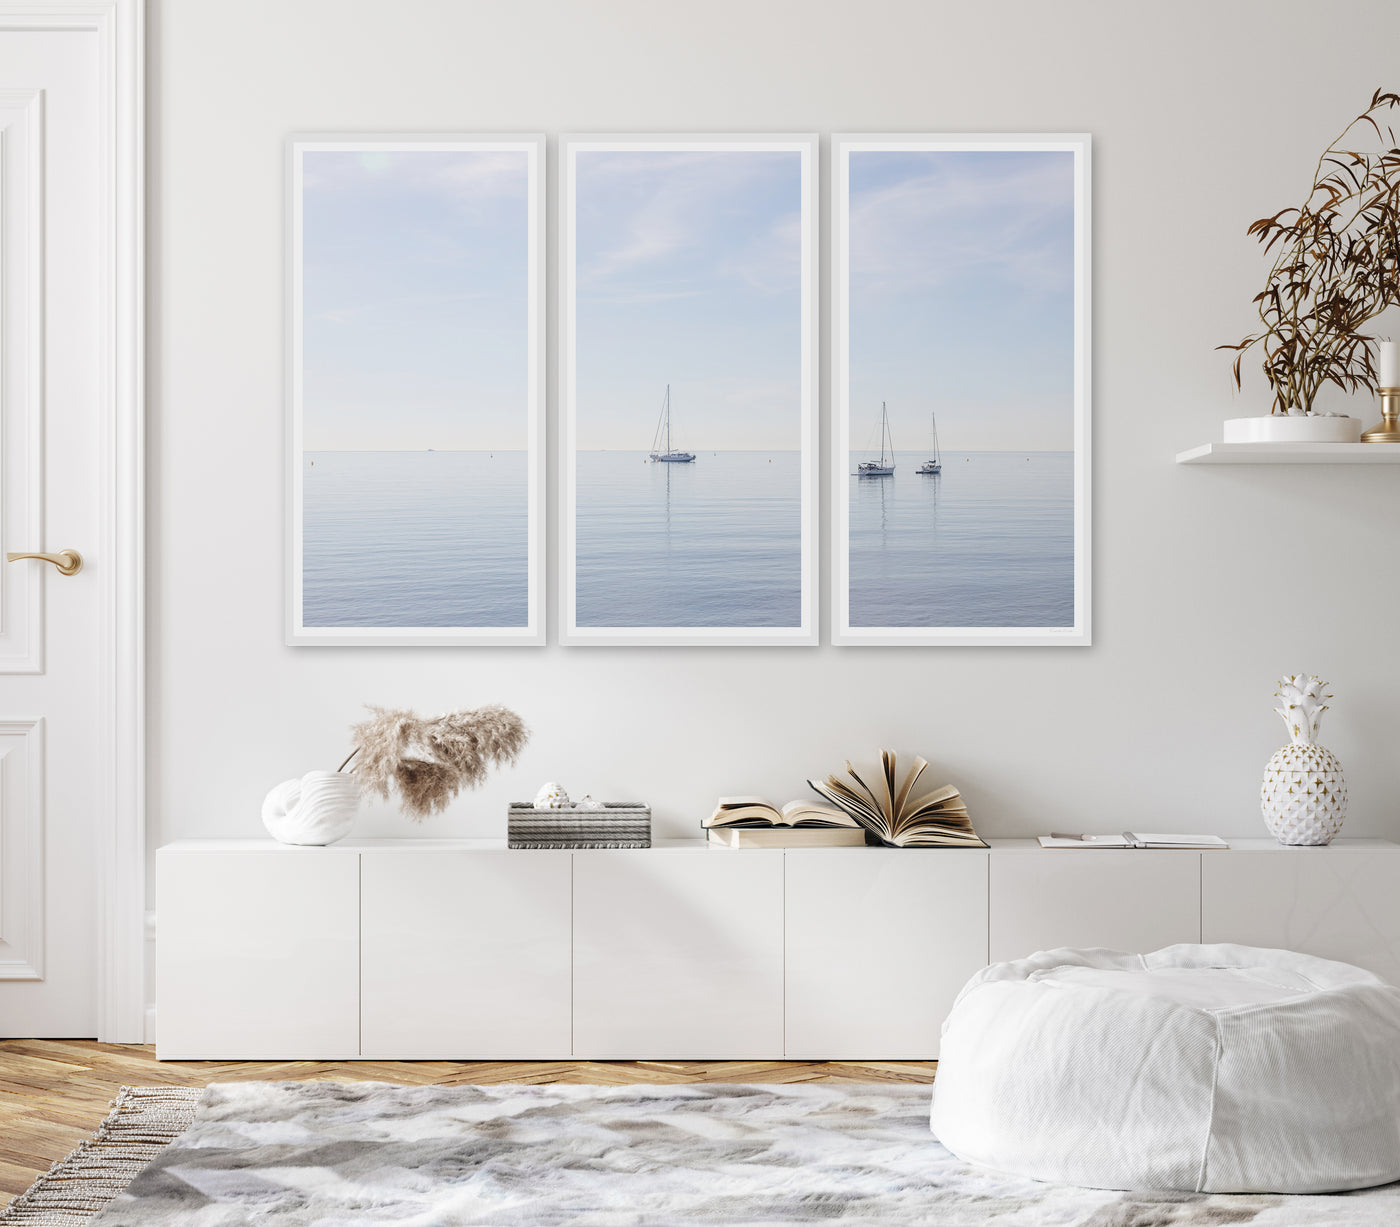 Boats No 6 - Triptych wall art by Cattie Coyle Photography